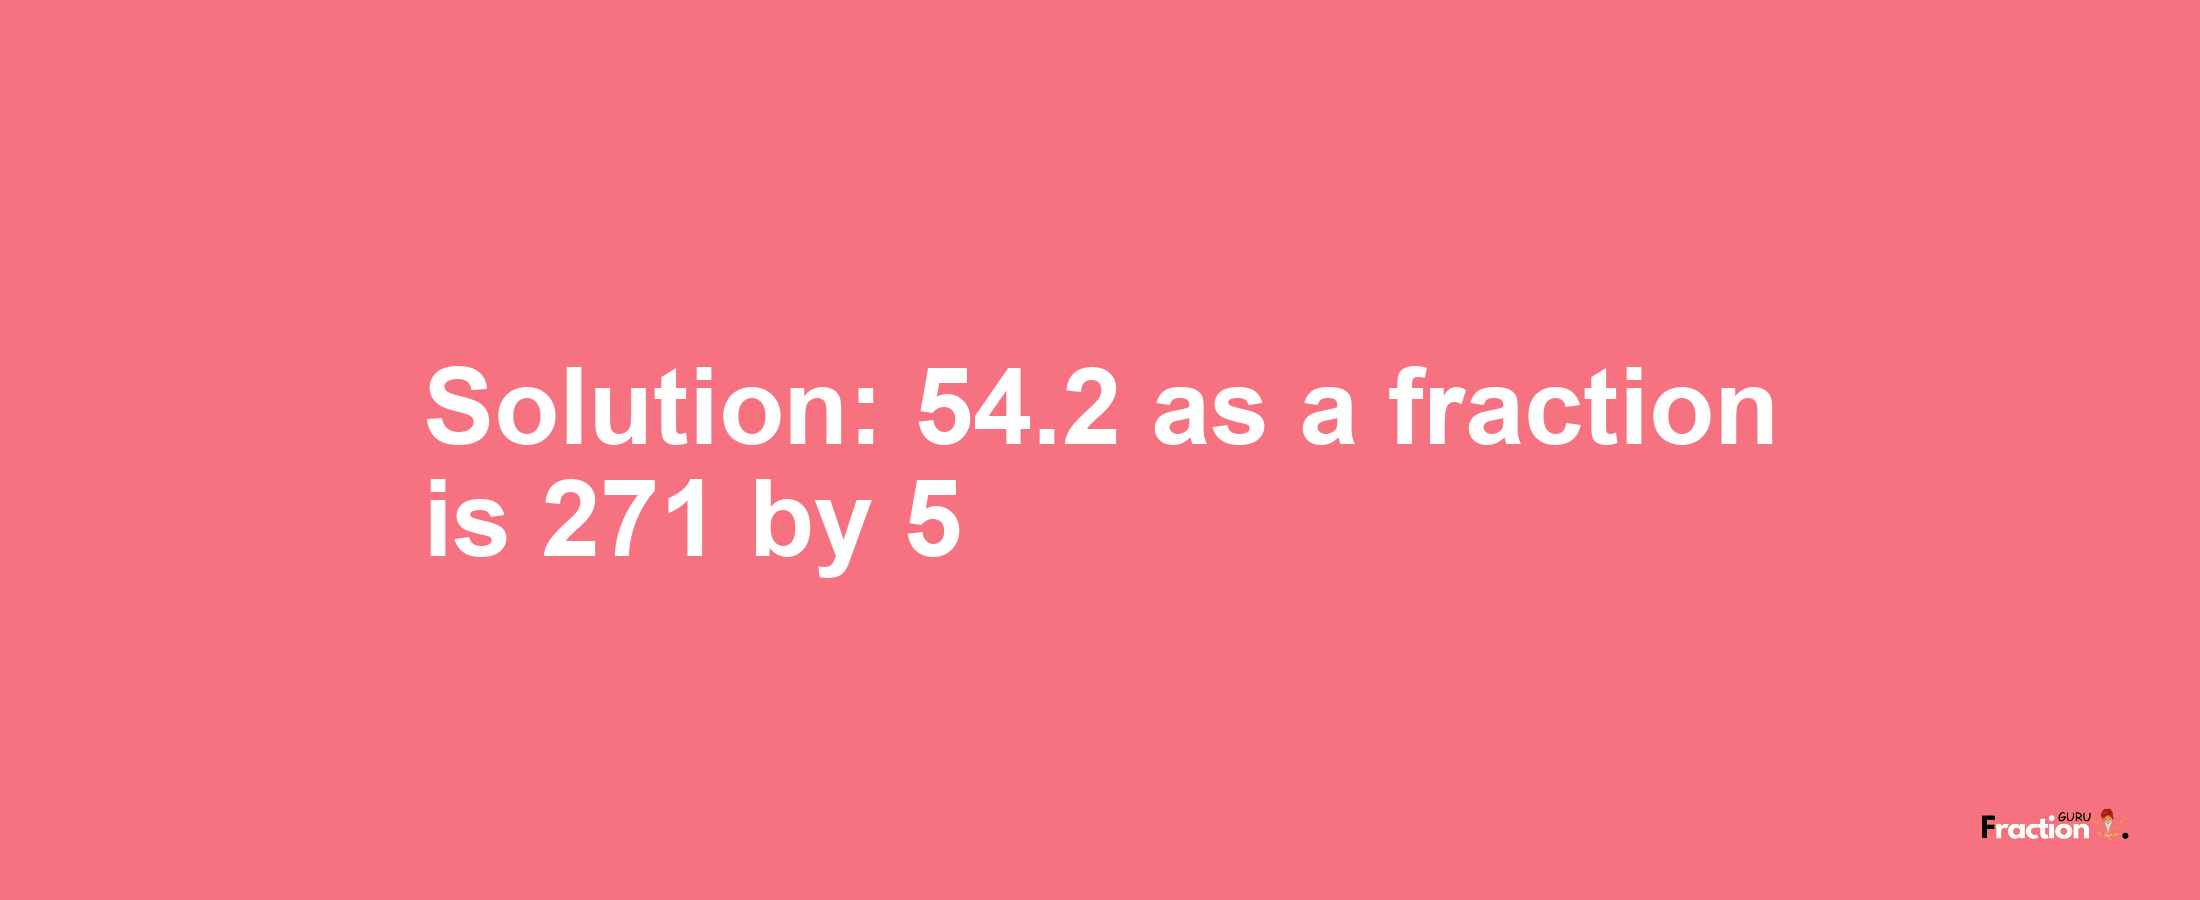 Solution:54.2 as a fraction is 271/5